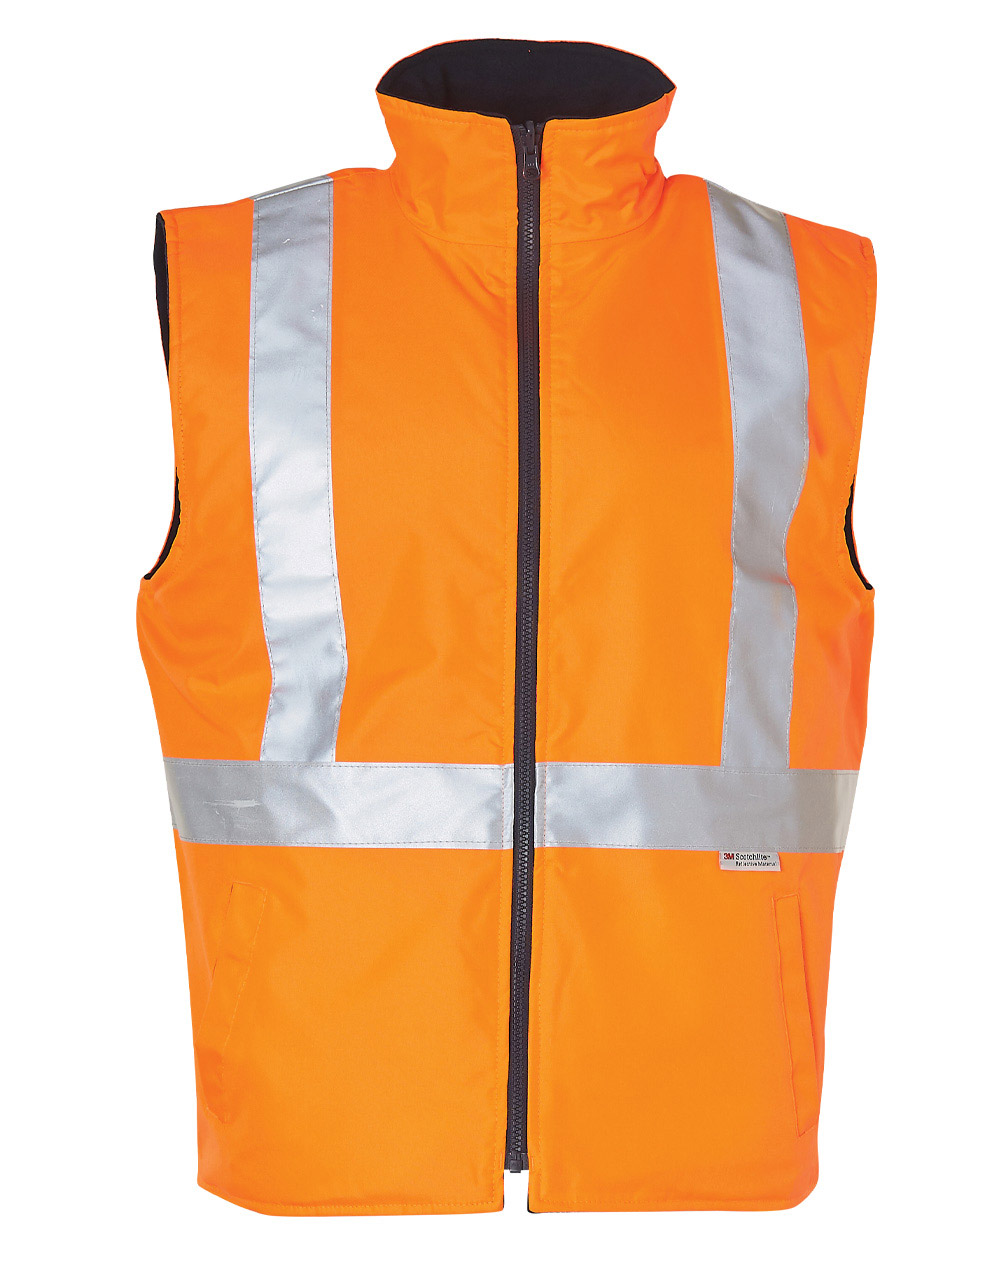 SW19A HI-VIS REVERSIBLE SAFETY VEST WITH 3M TAPES - Tradie Marketing ...